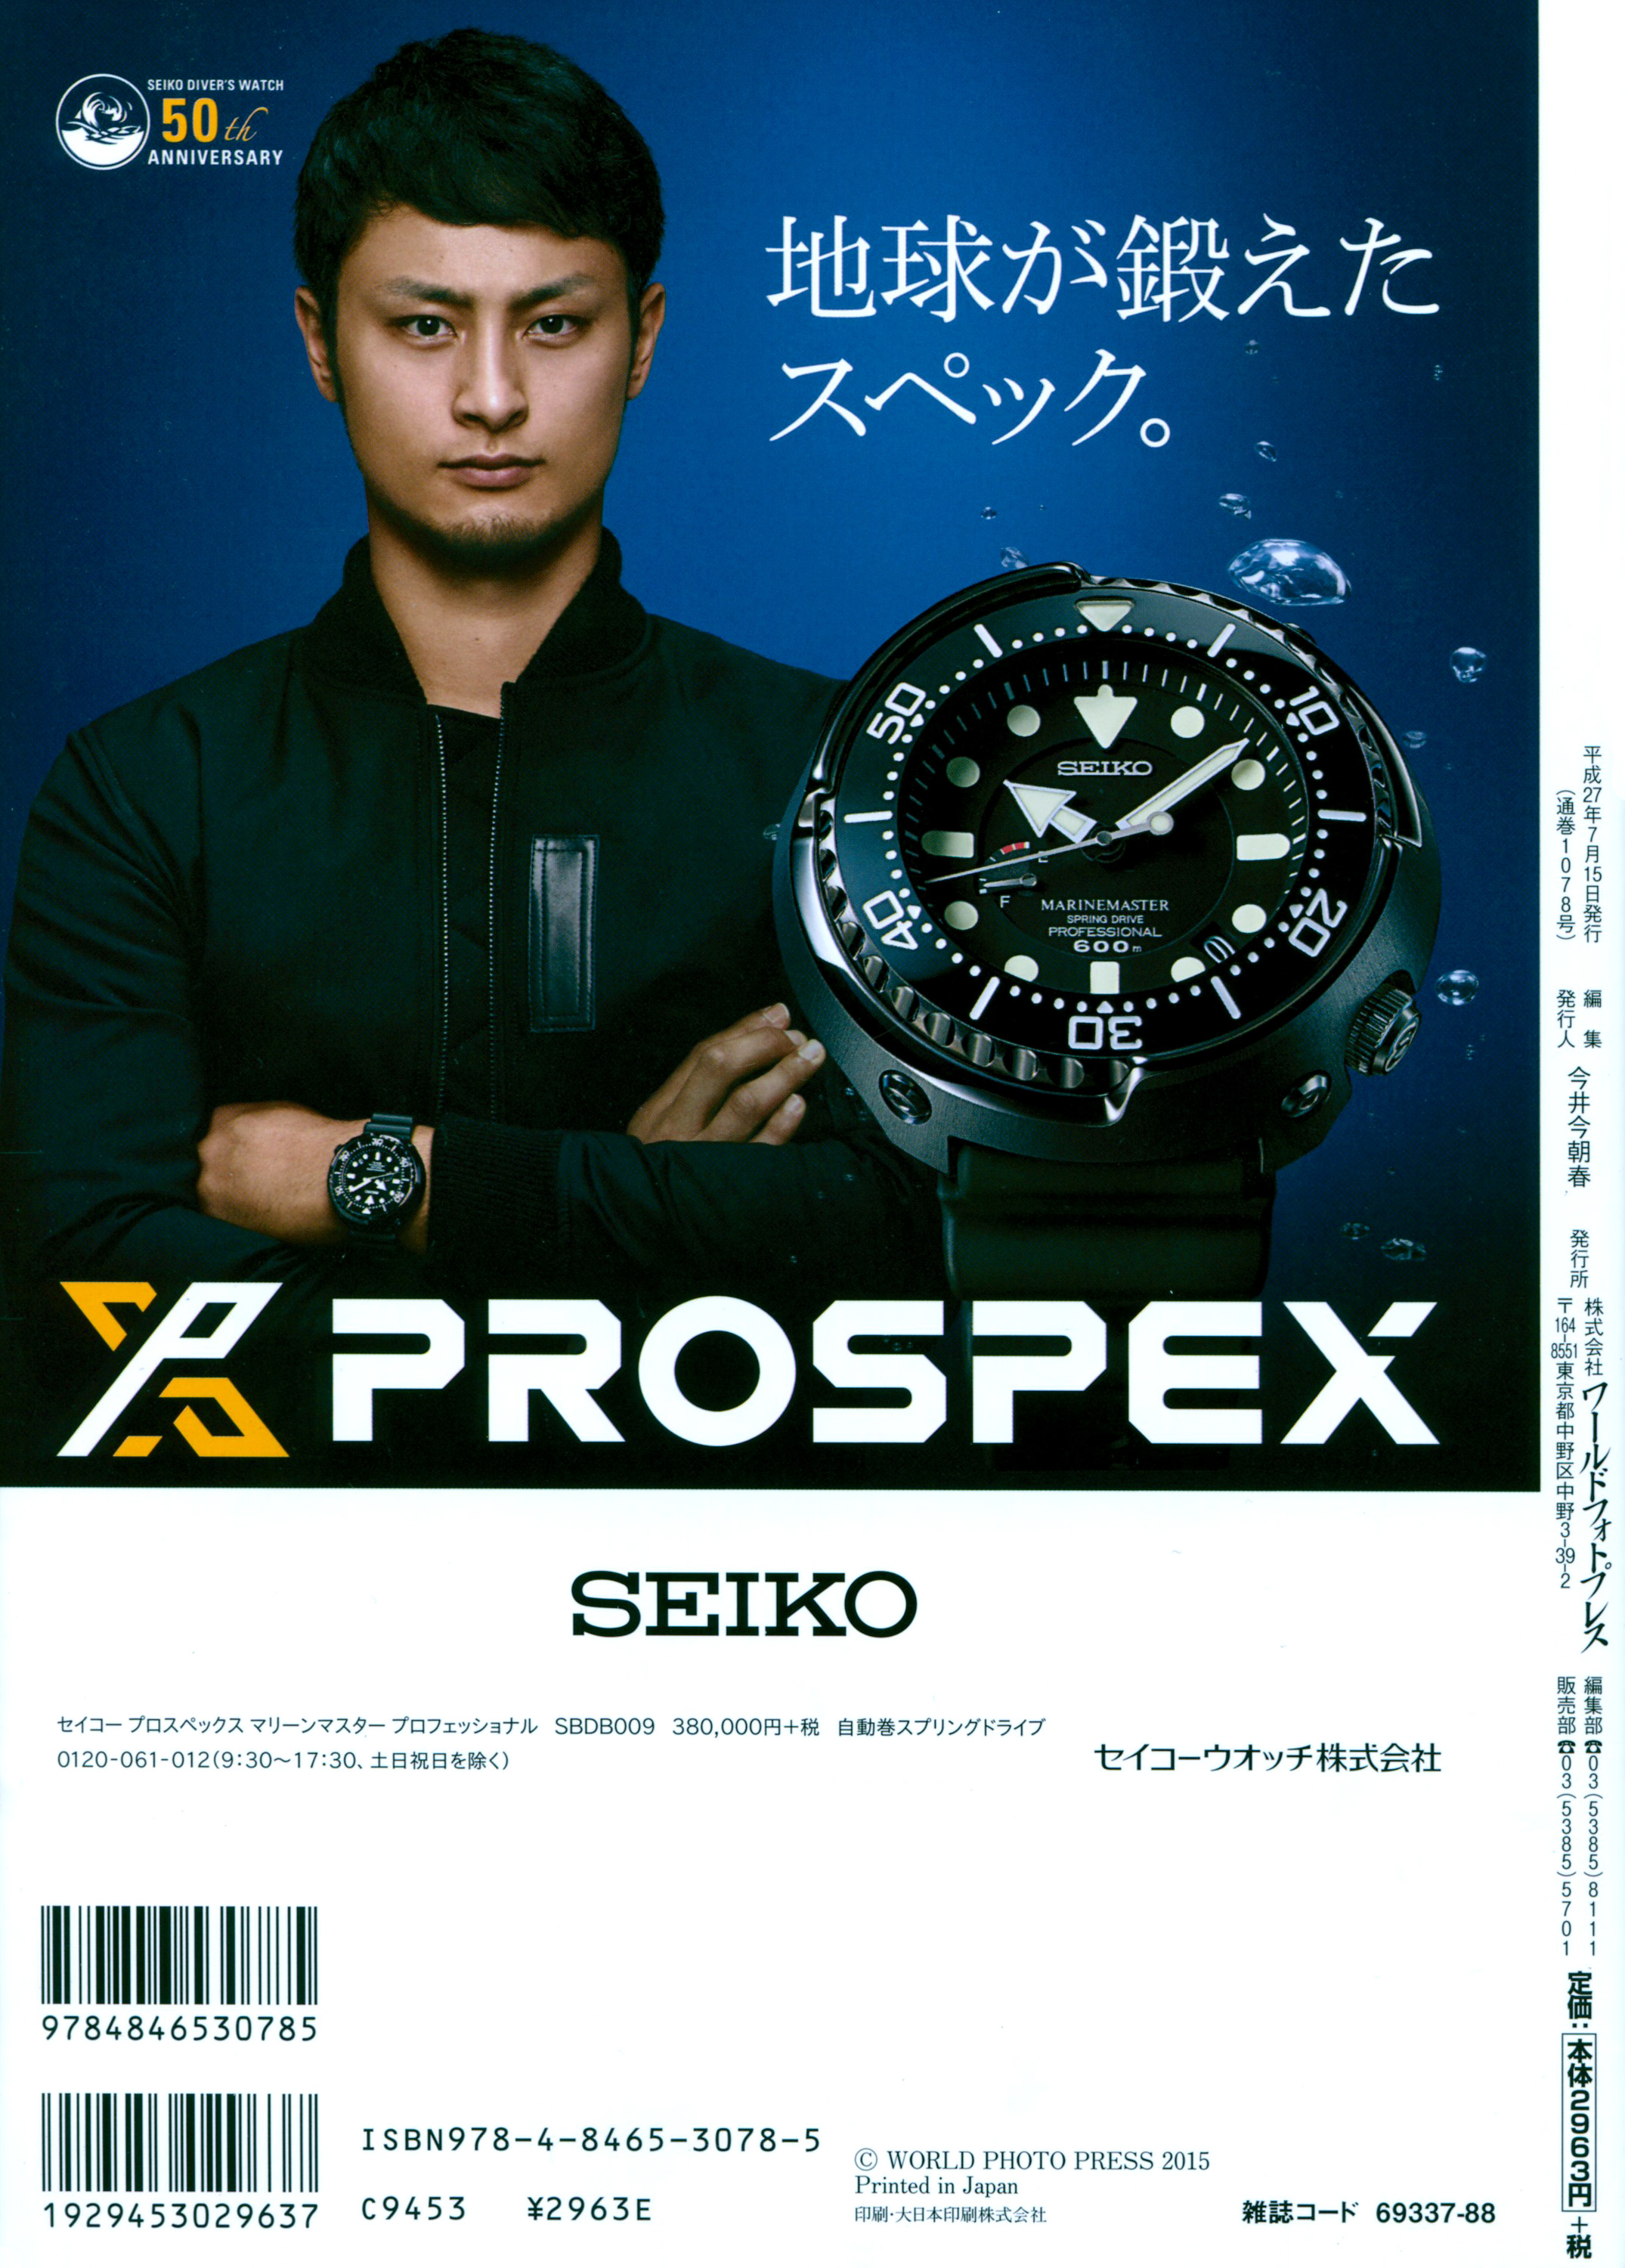 Understanding Seiko Group Evolution & Company Structure — Plus9Time